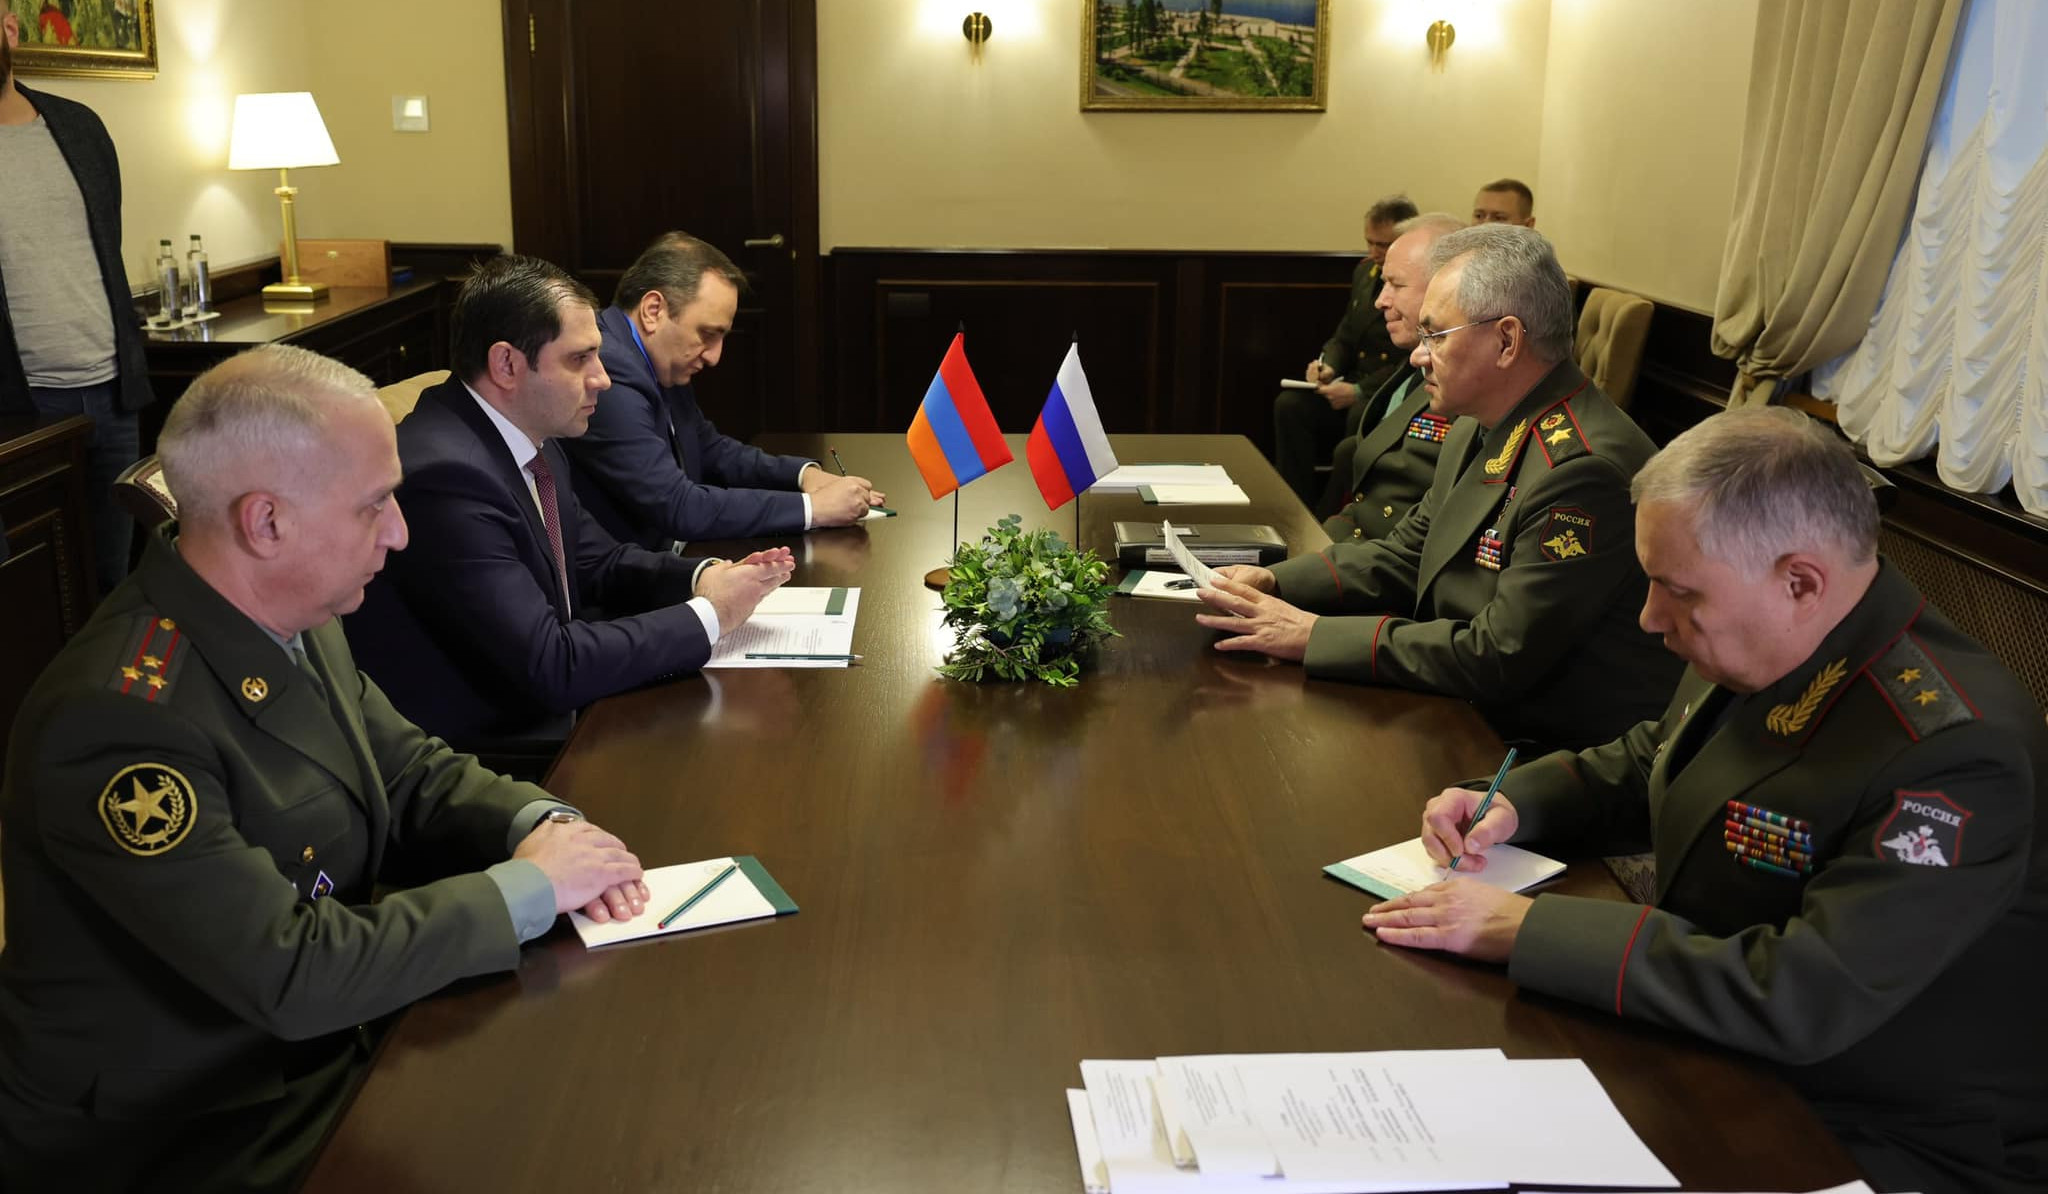 The 2023 plan of military cooperation between Armenia’s and Russia’s defense ministries signed